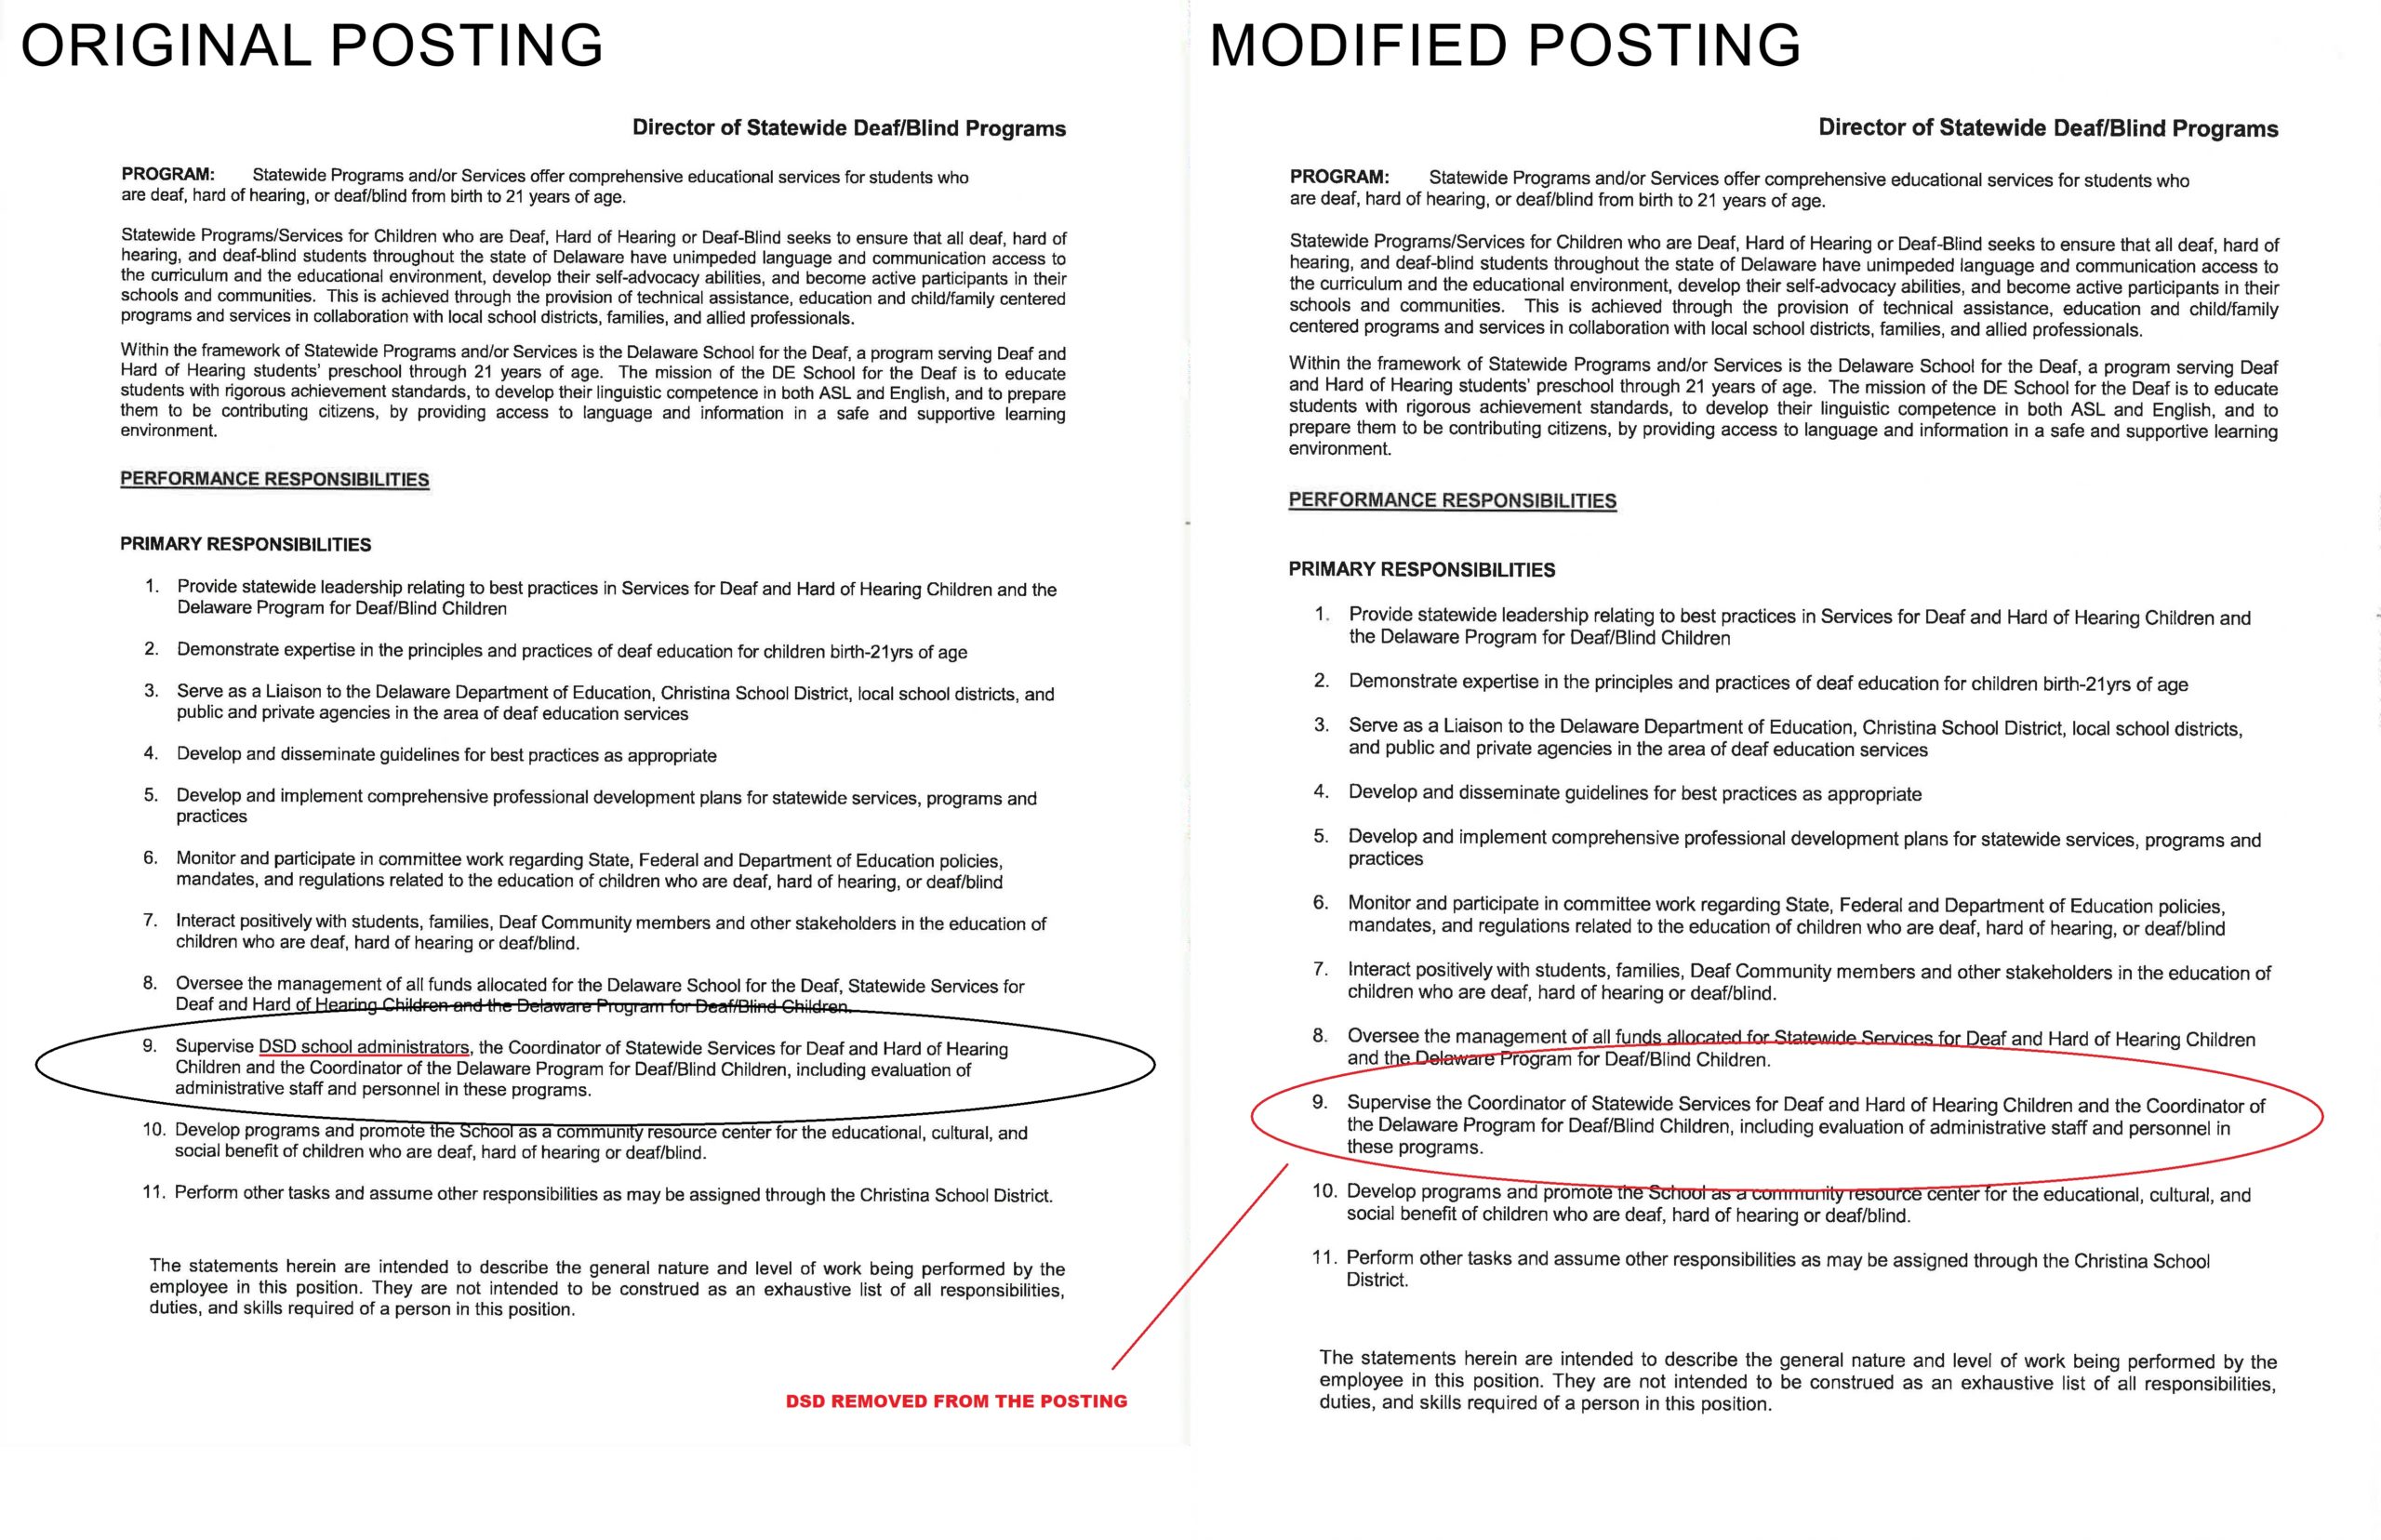 Director position showing before and after responsibility change circled.